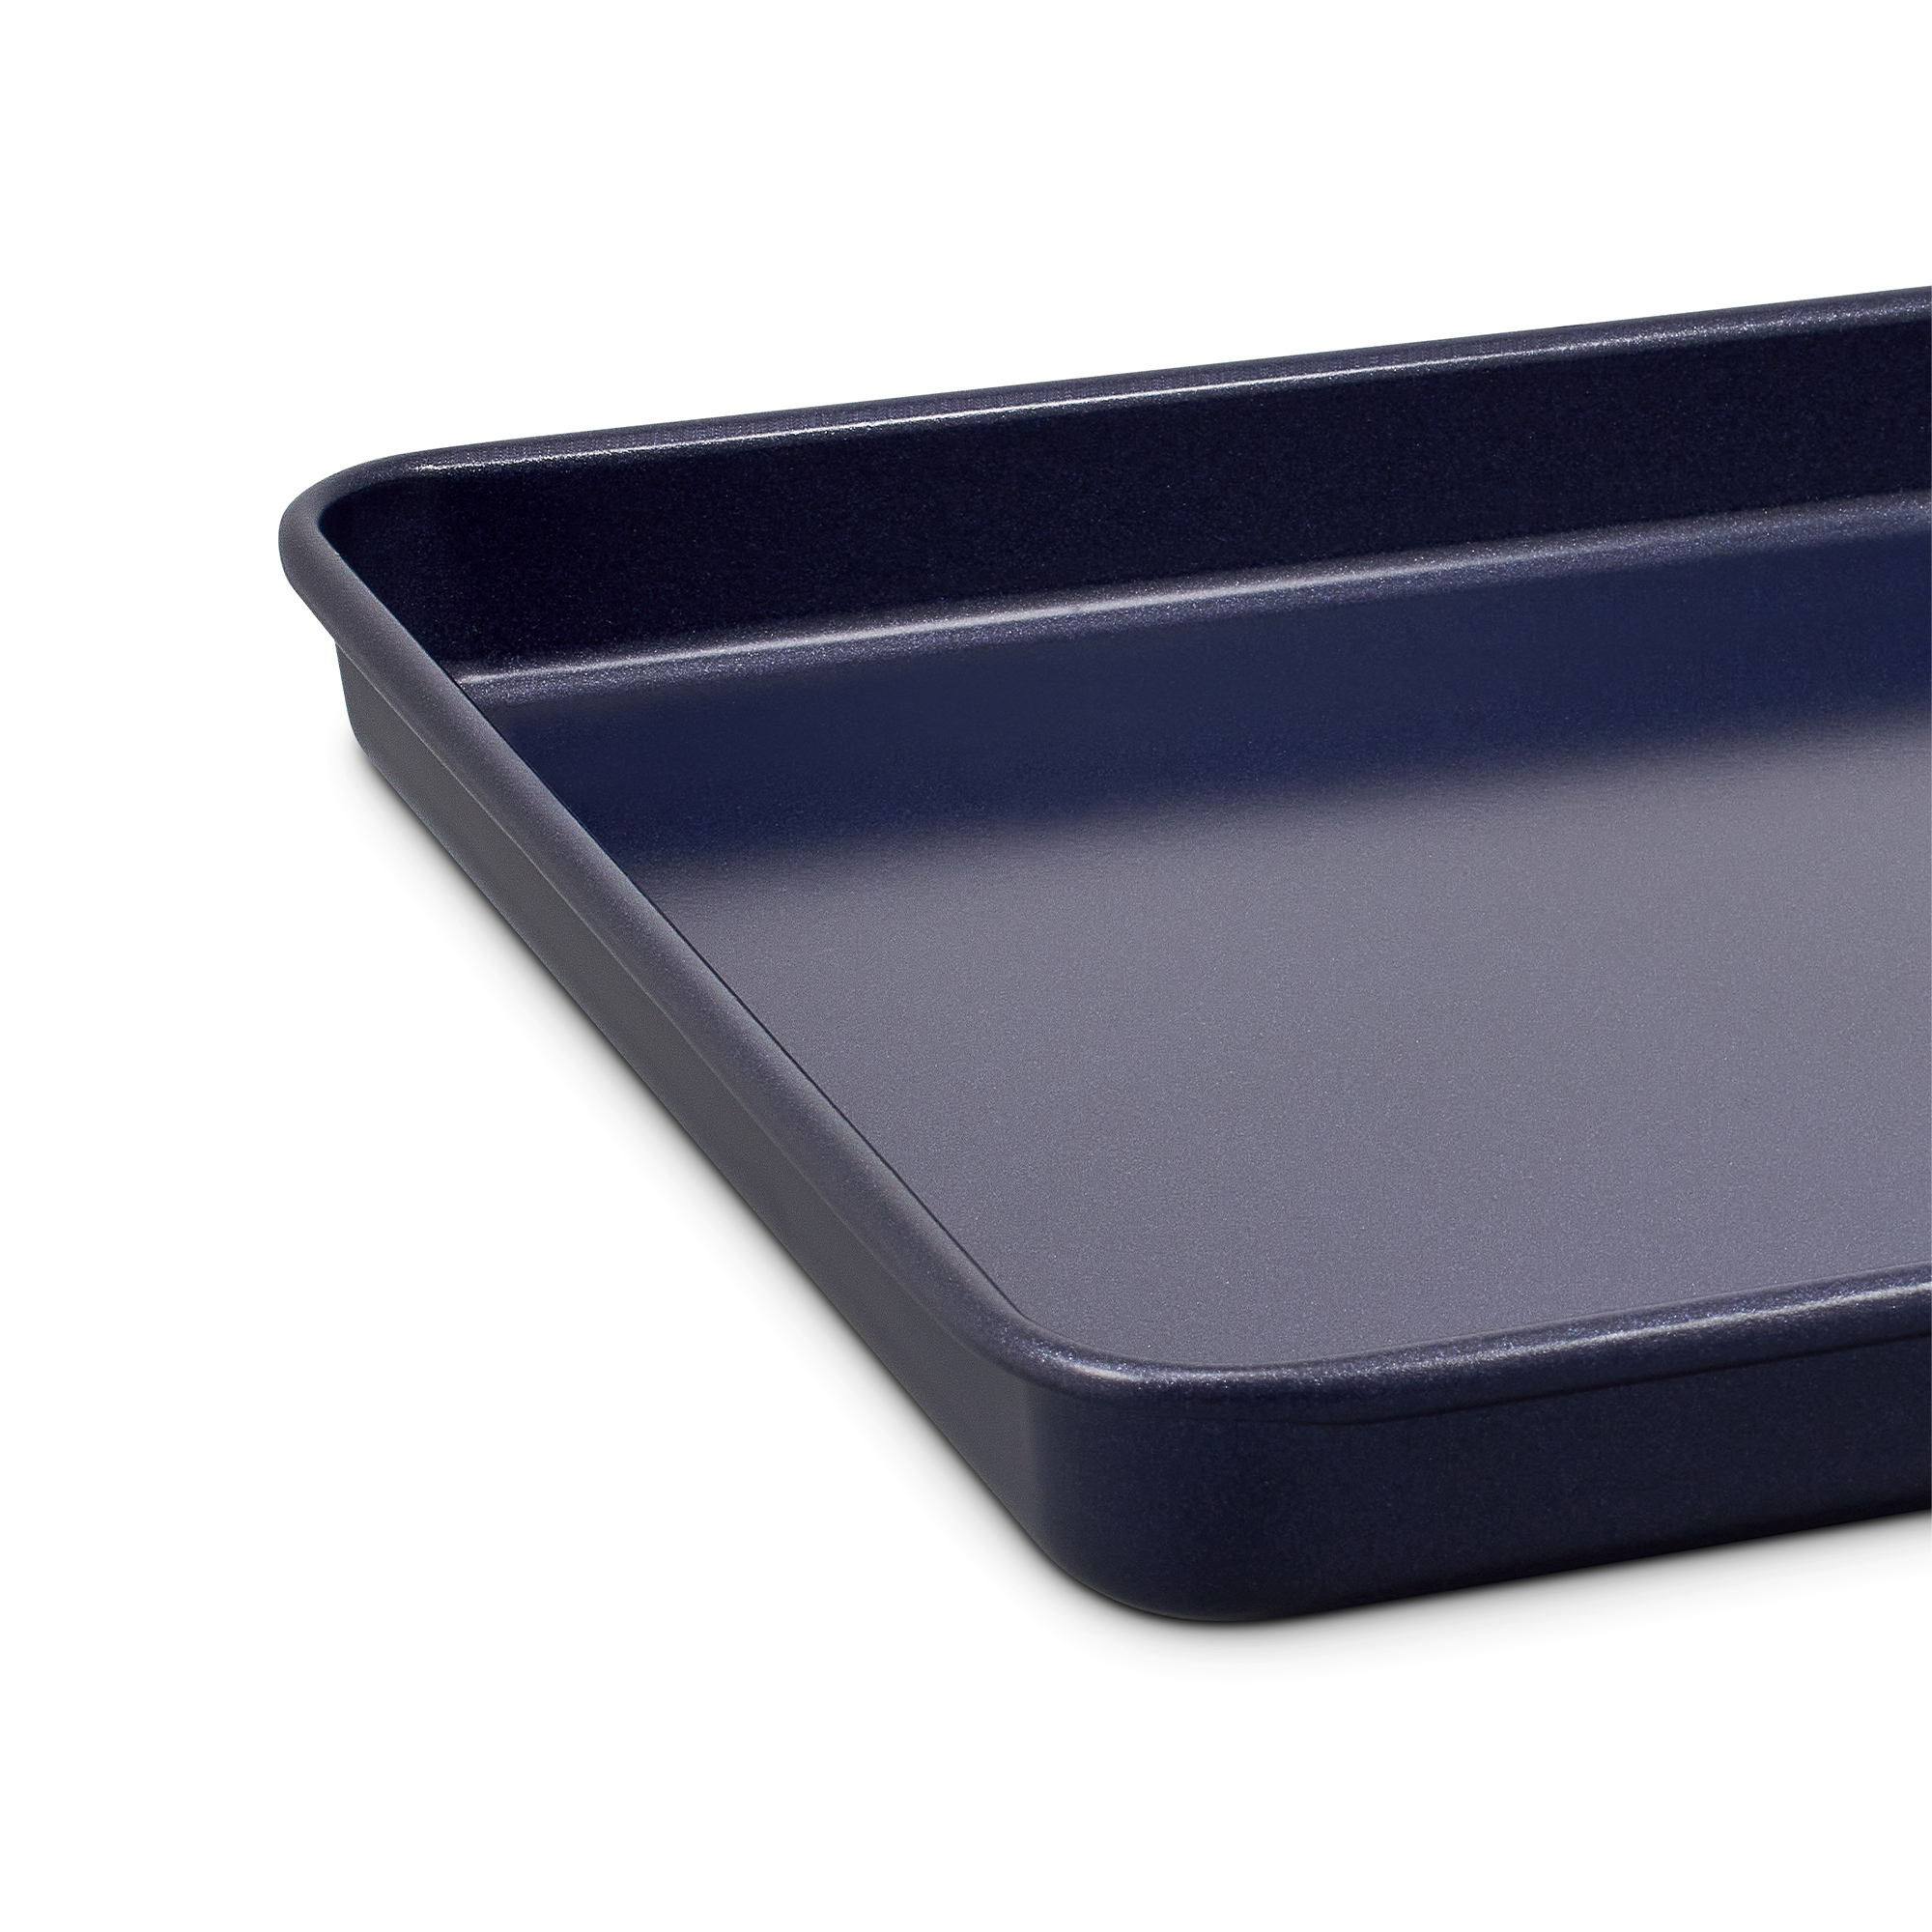 ZYLISS - Baking tray with non-stick coating - 39 cm x 27 cm